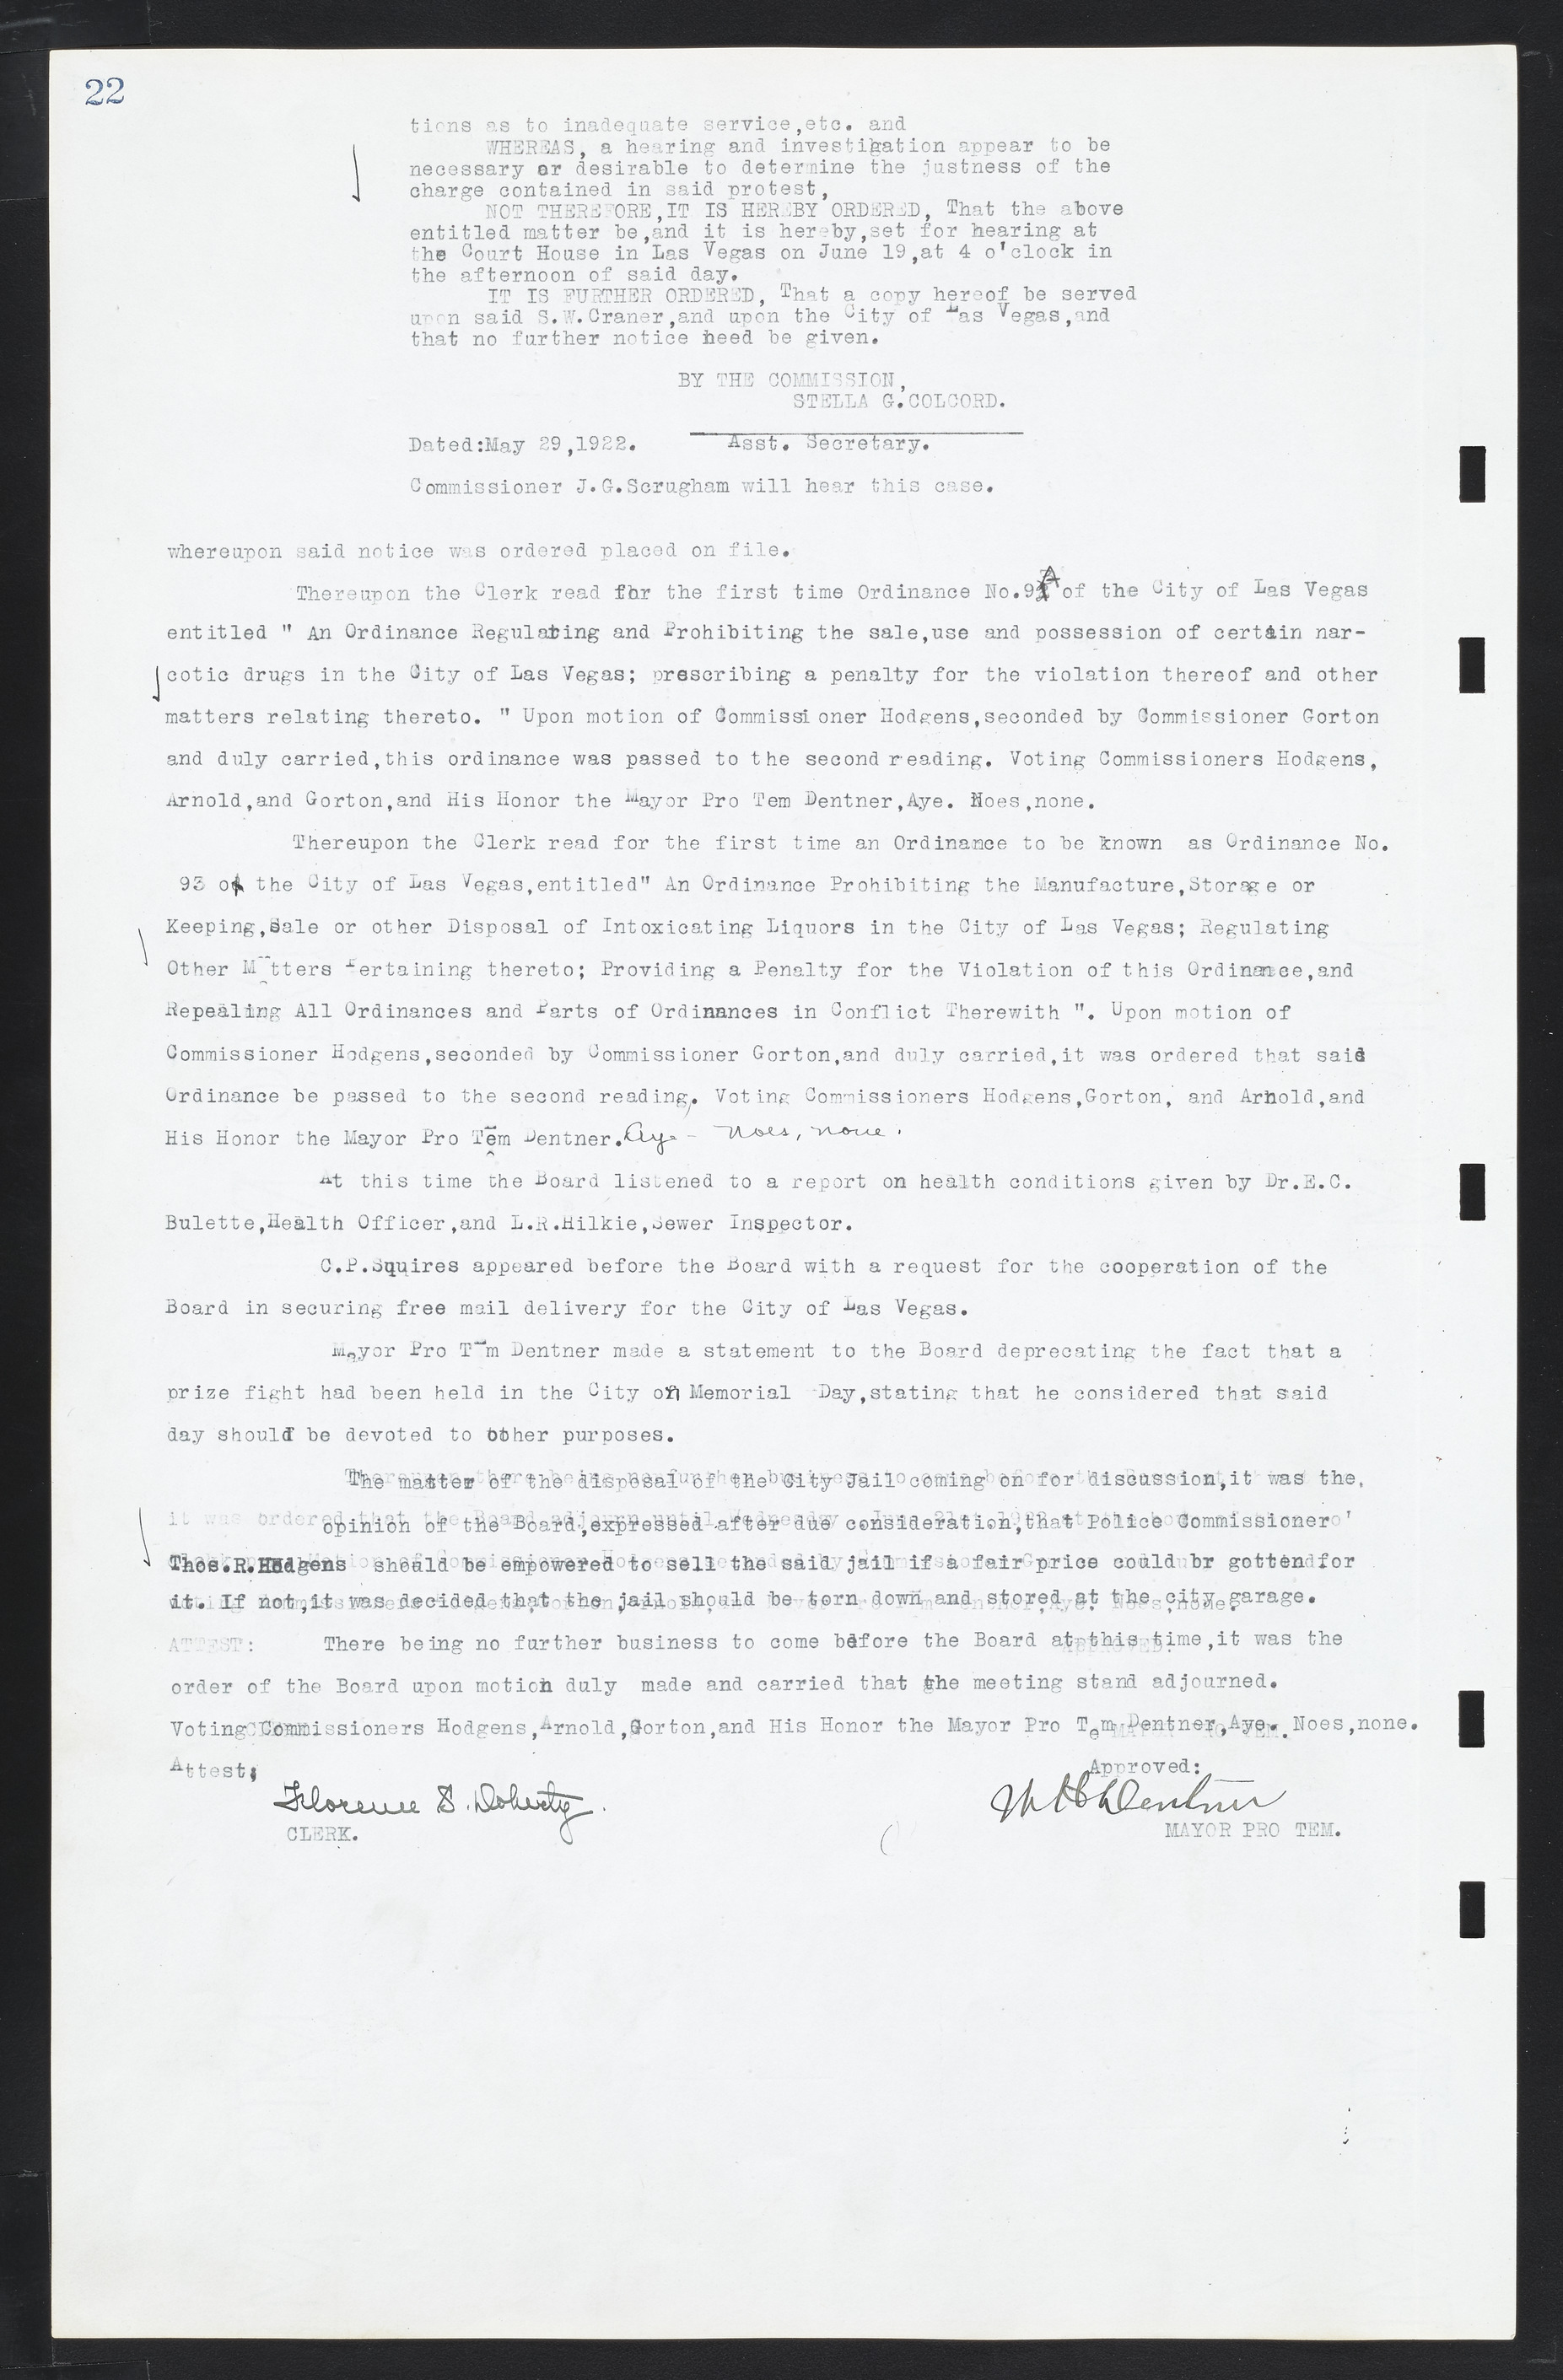 Las Vegas City Commission Minutes, March 1, 1922 to May 10, 1929, lvc000002-29